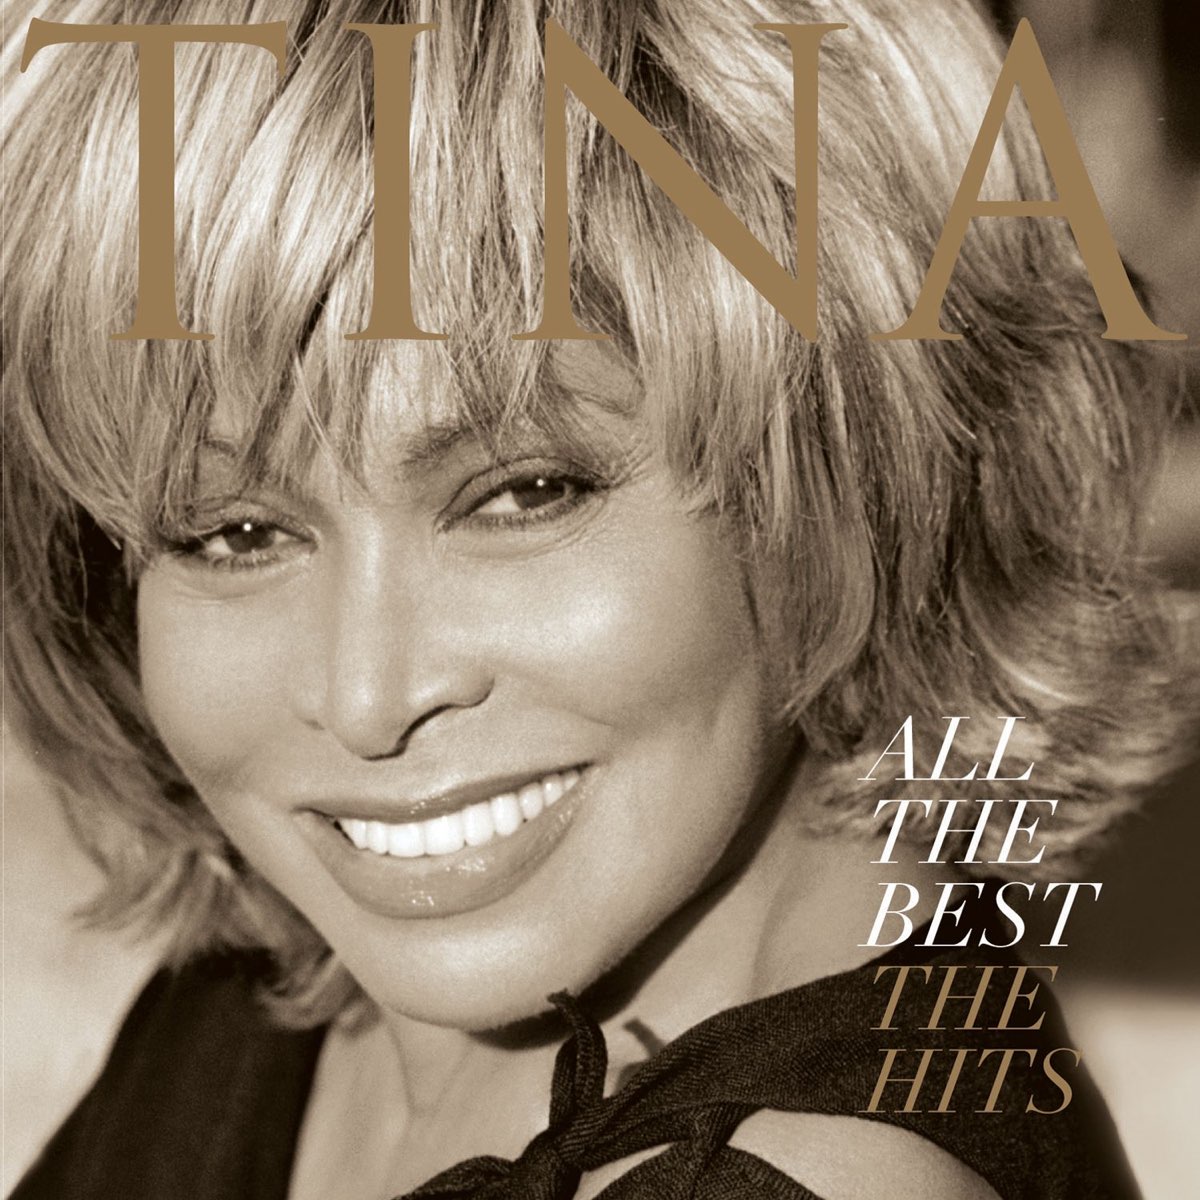 ‎All the Best: The Hits par Tina Turner sur Apple Music